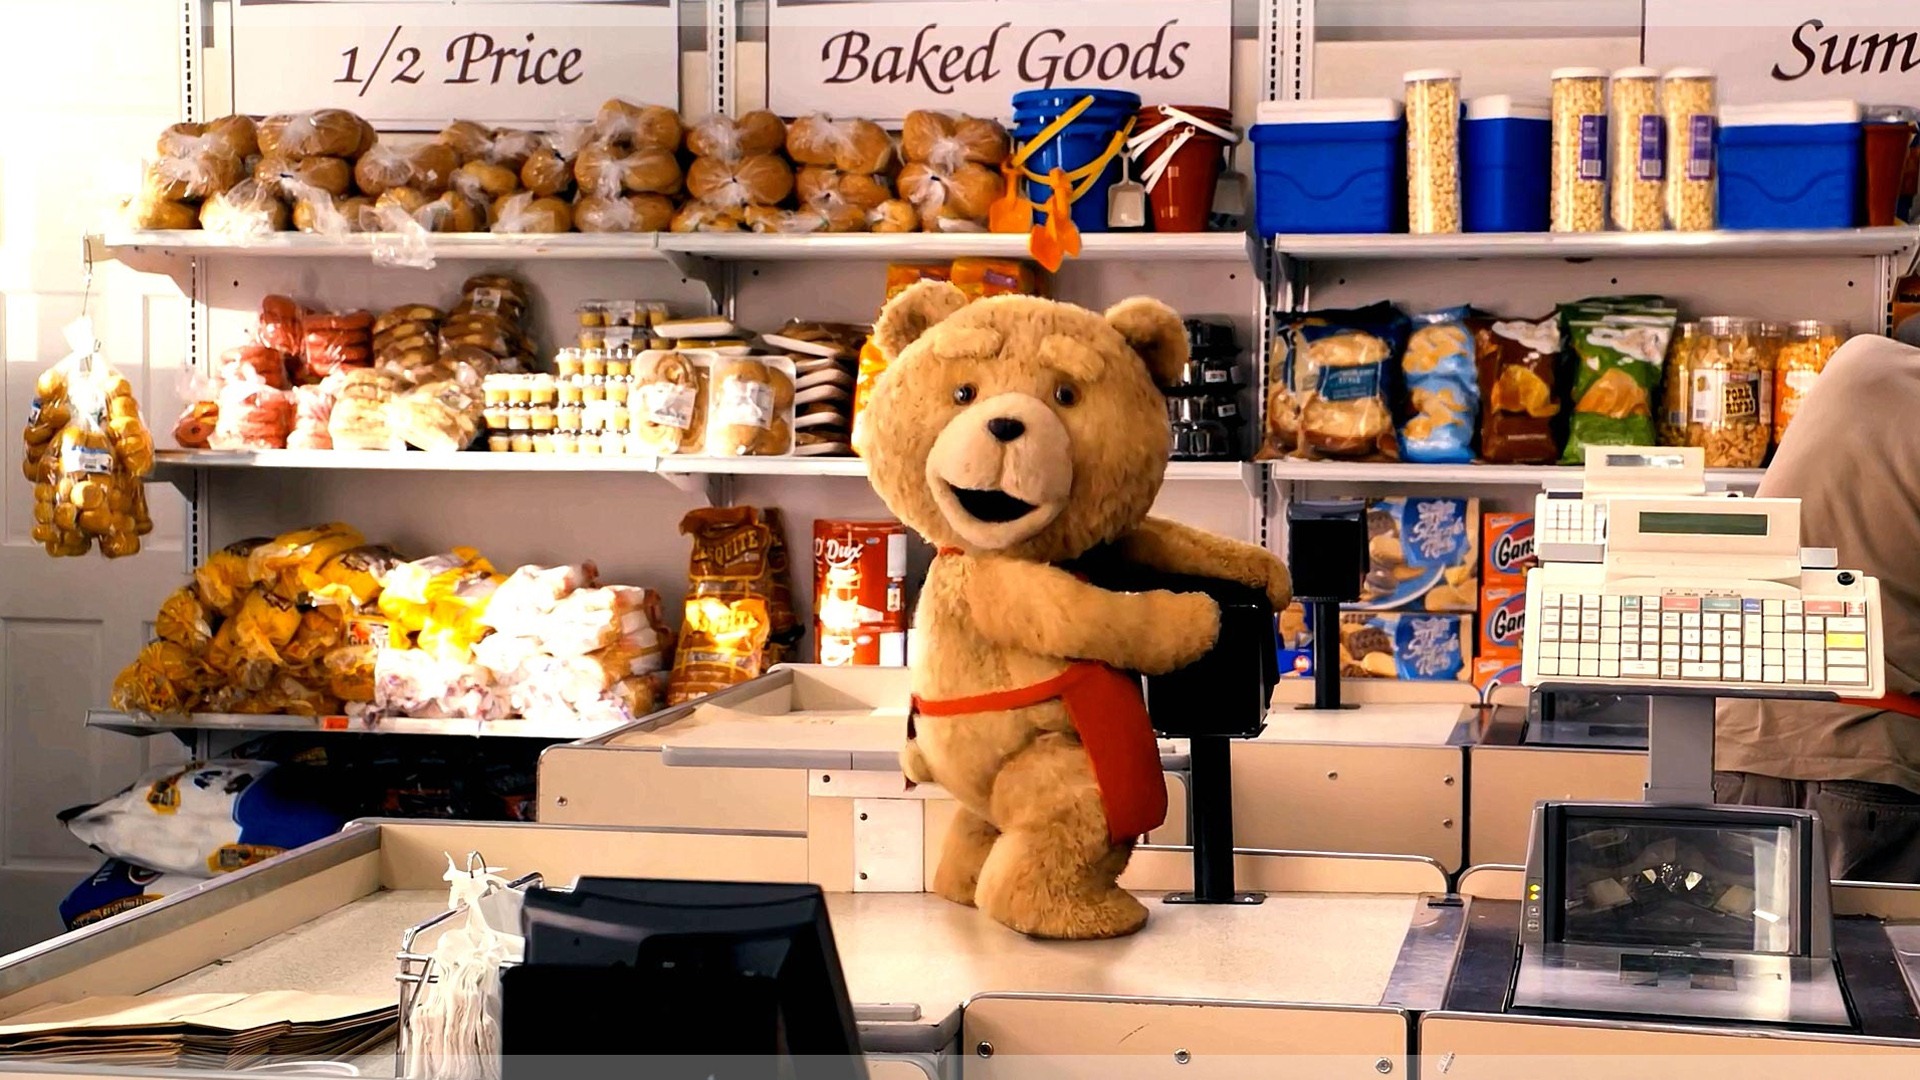 Ted 2012 HD movie wallpapers #12 - 1920x1080